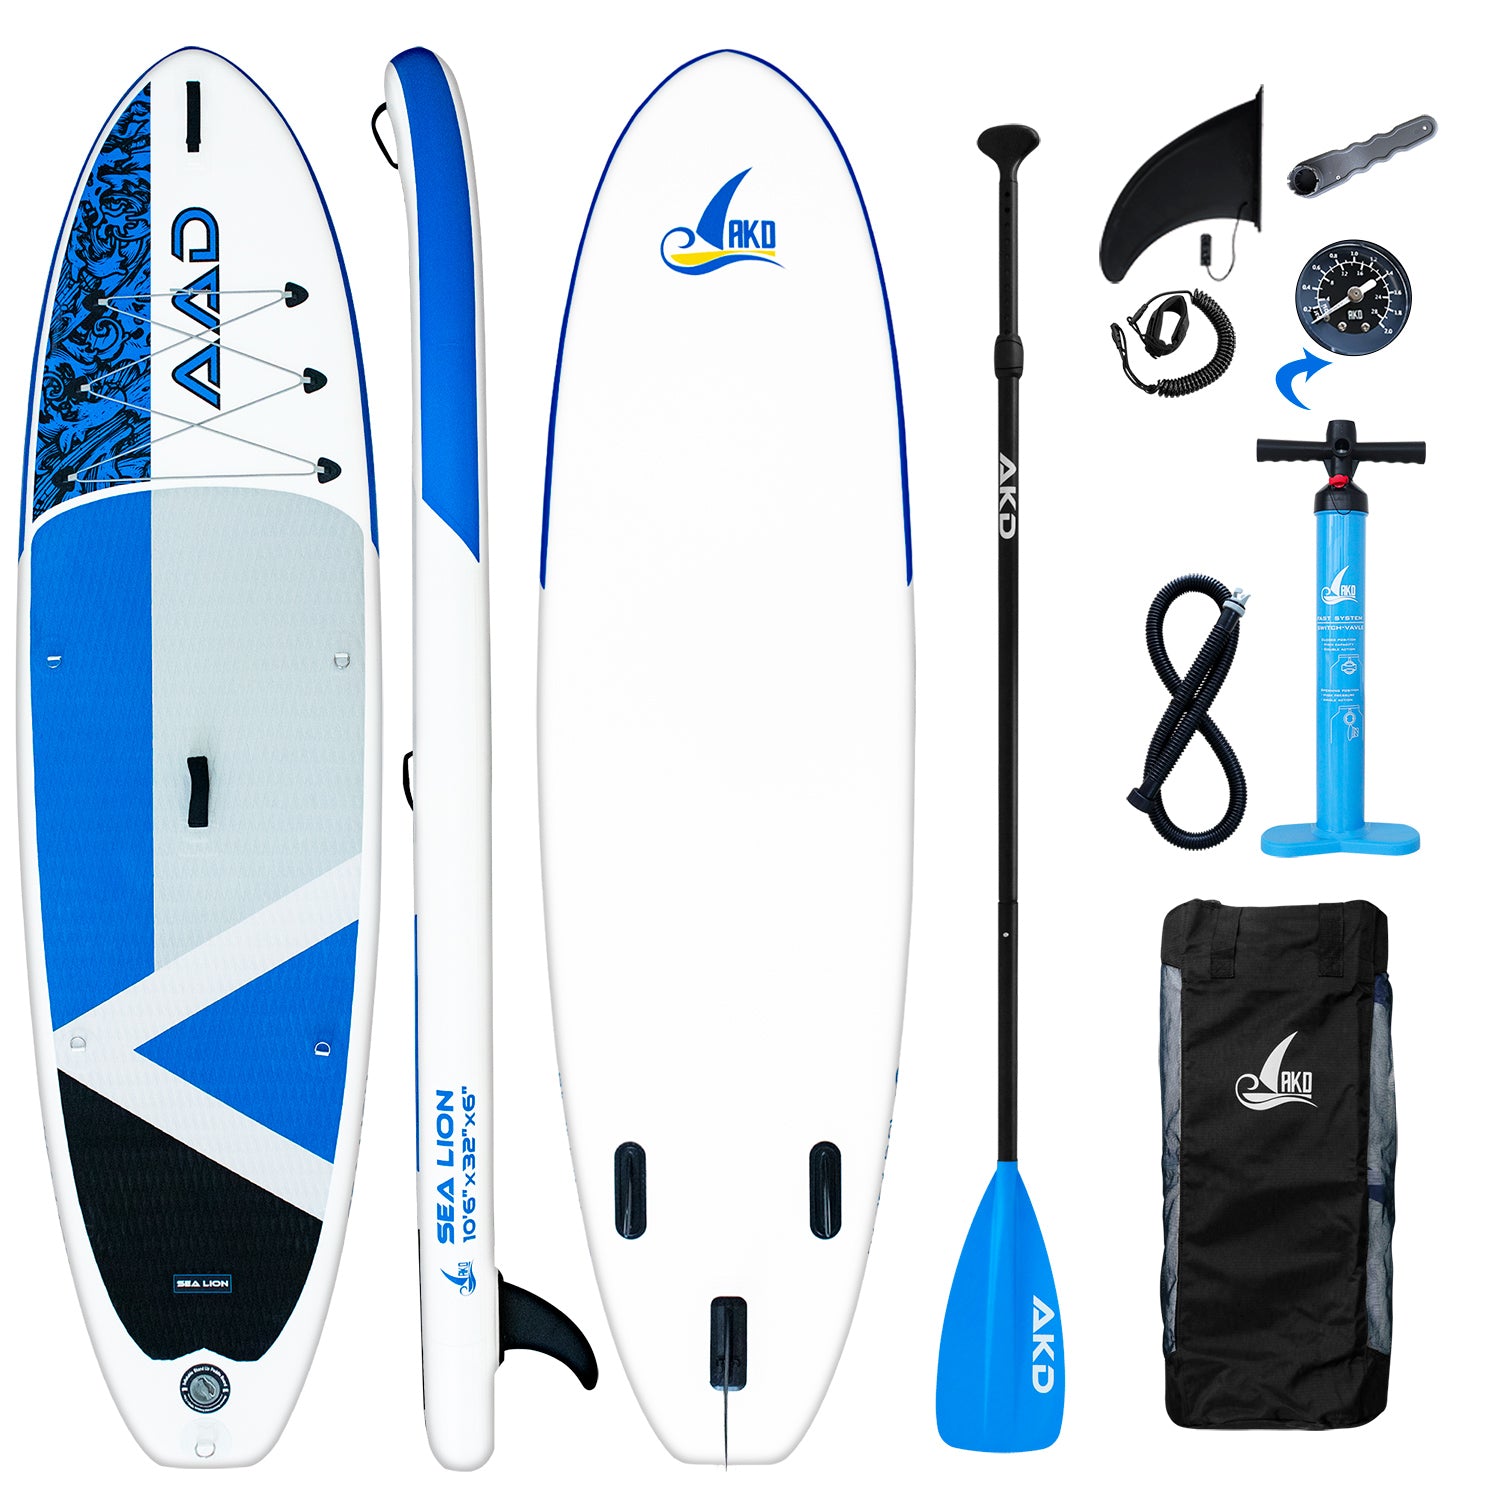 AKD SeaLion Stand Up Paddle Board 10'6 "320x81x15cm SUP Board 150kg / 318L (Blue)